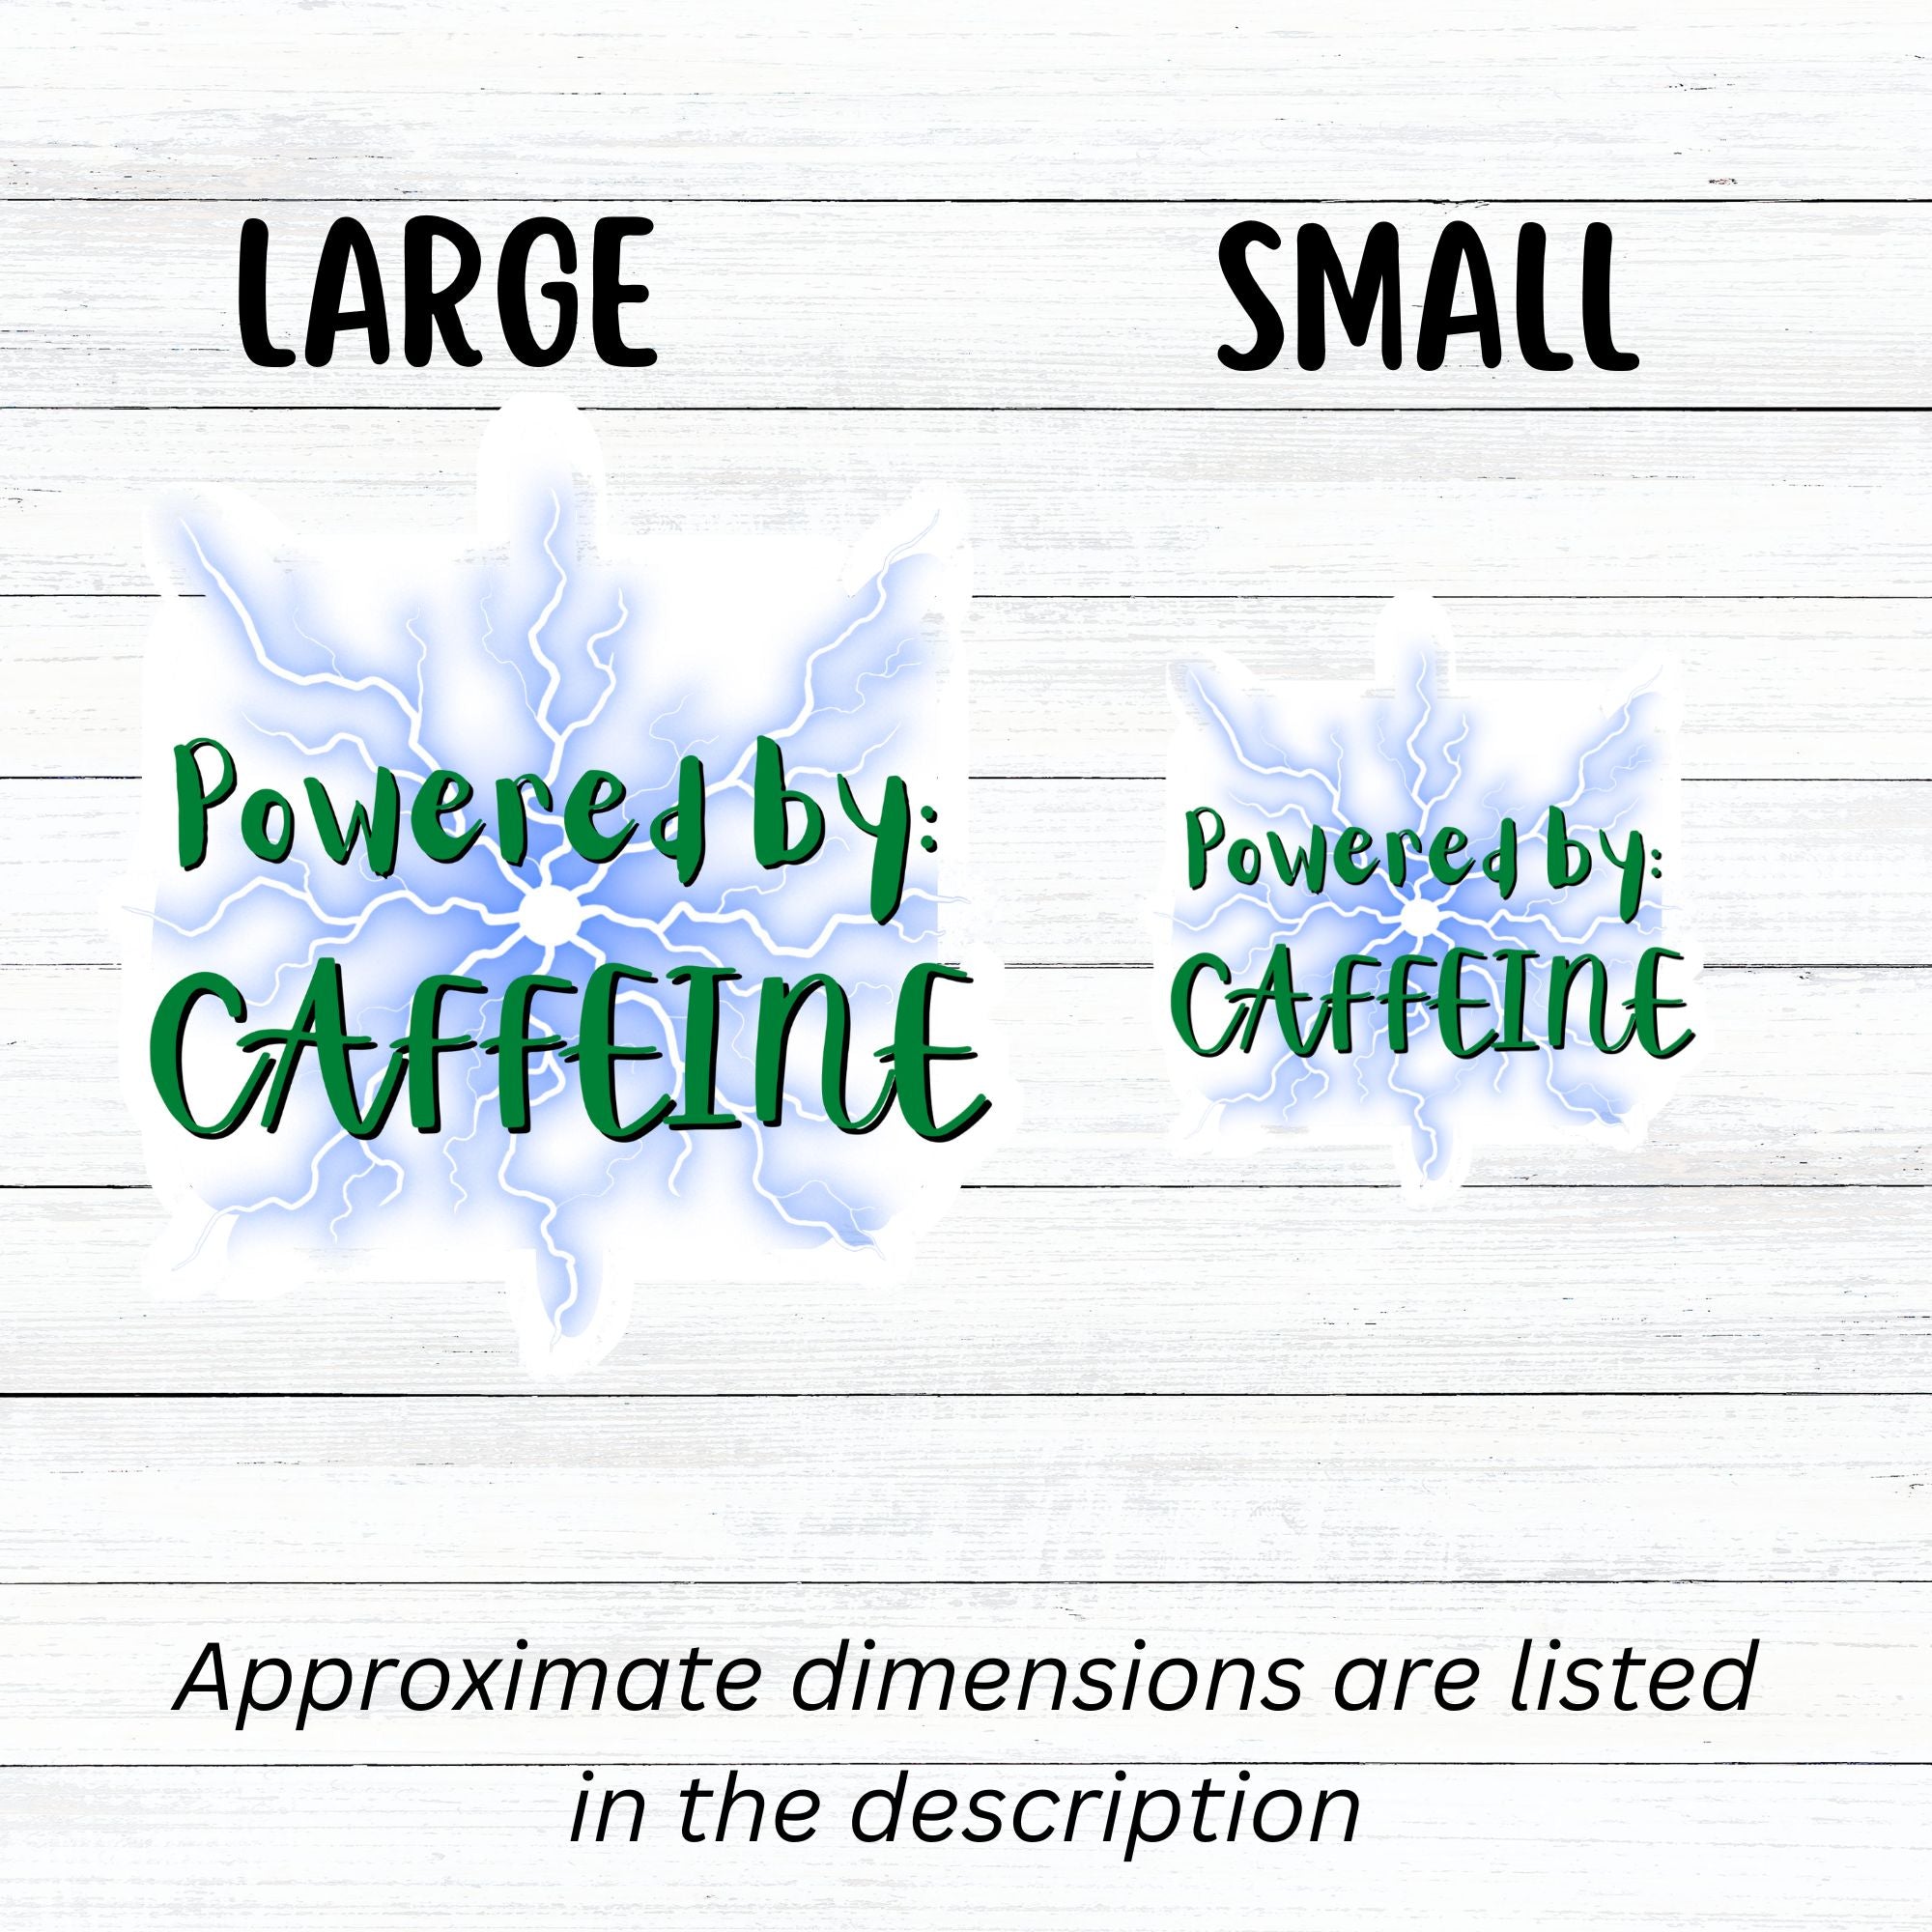 For those who like it, caffeine can be the magic elixir! This individual die-cut sticker has the words Powered by CAFFEINE in green over a background of blue electric/lightning bolts. This image shows large and small Powered by Caffeine stickers next to each other.